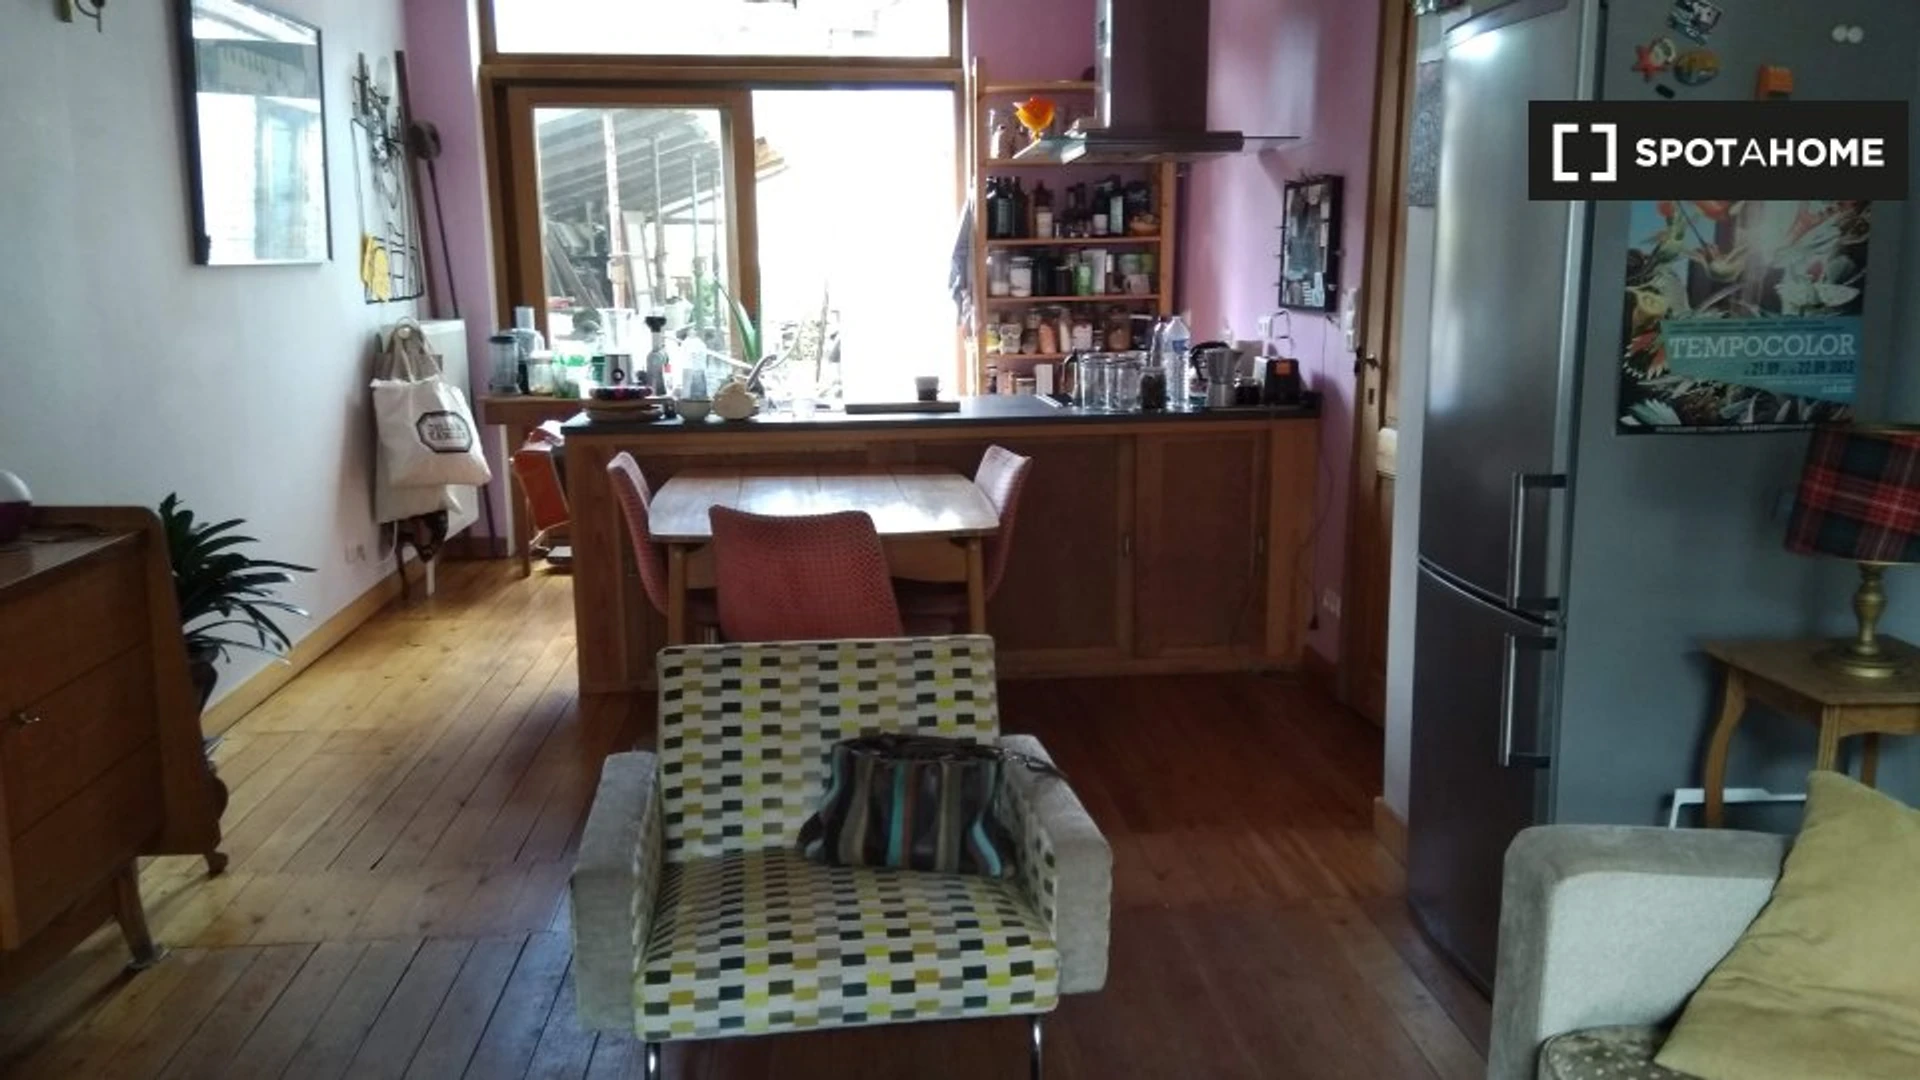 Room for rent in a shared flat in Liège